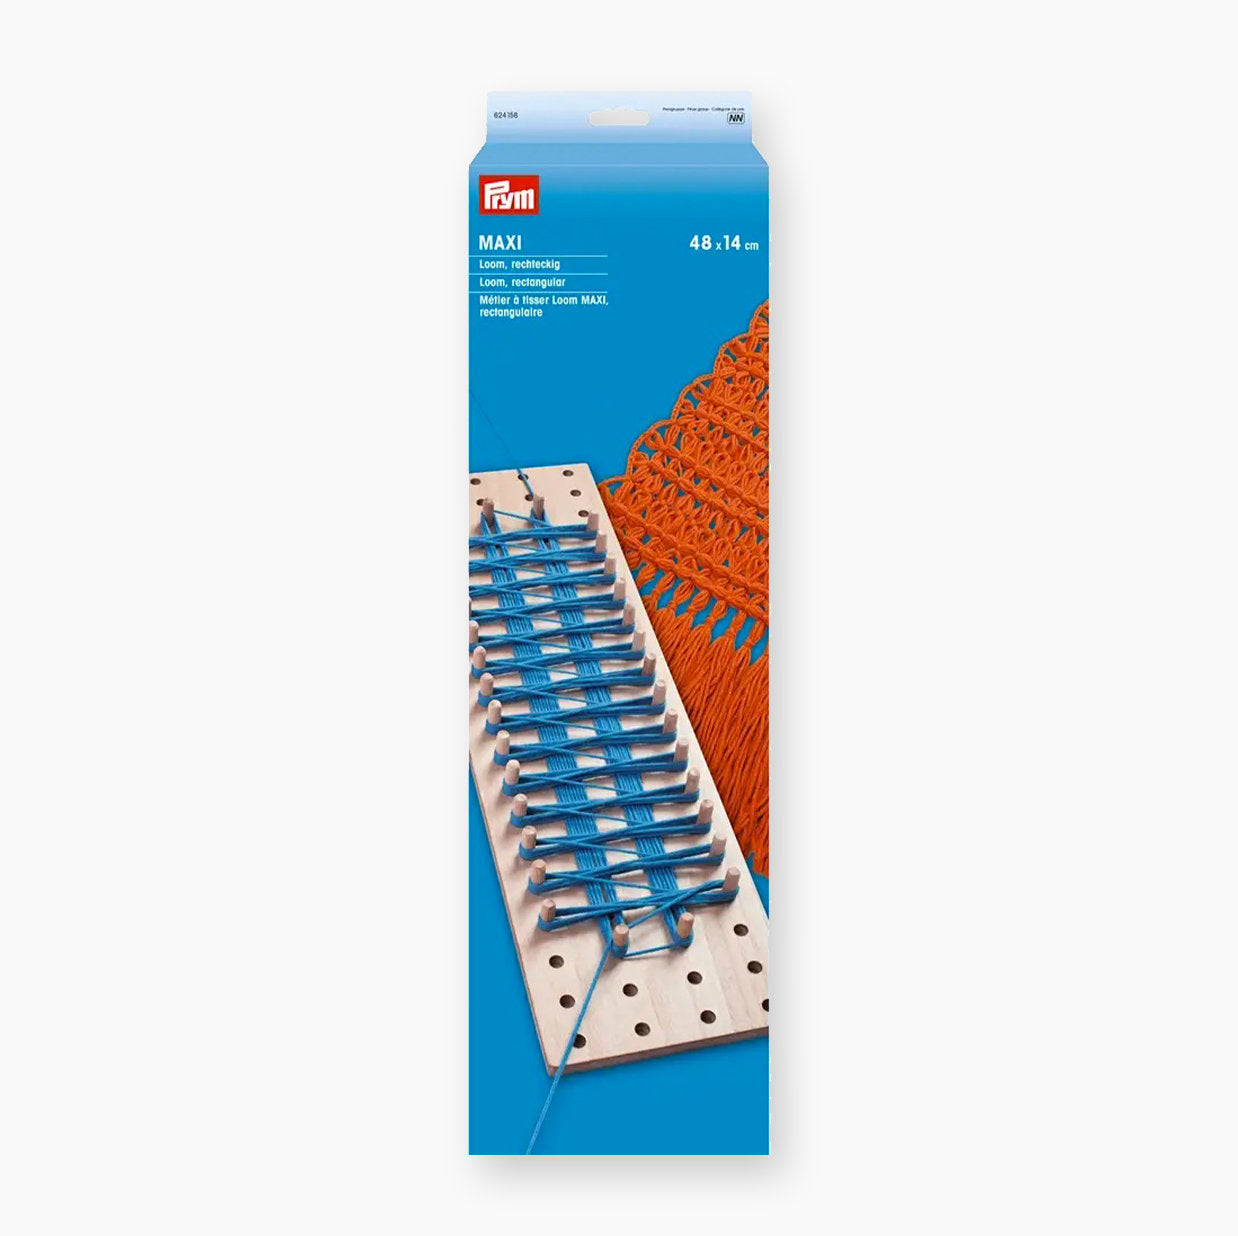 Prym 624158 MAXI rectangular loom to weave personalized rectangles